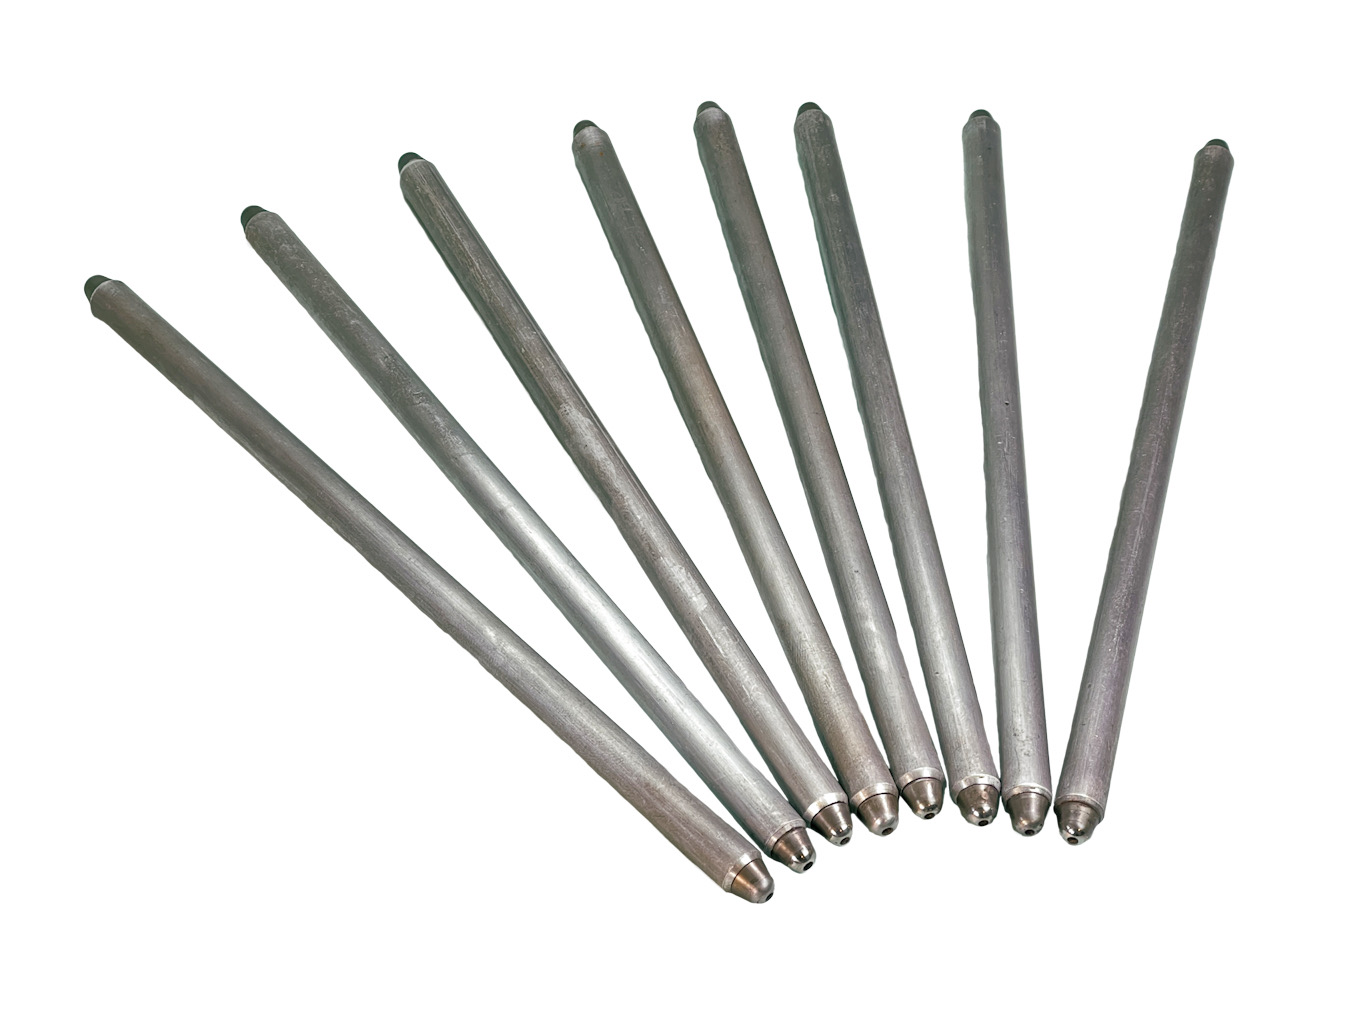 OE GERMAN VW TYPE 2 BUS 1700 1800 2000 ALUMINUM ENGINE PUSHRODS FOR SOLID LIFTERS - 021 109 301 A - USED SET OF 8